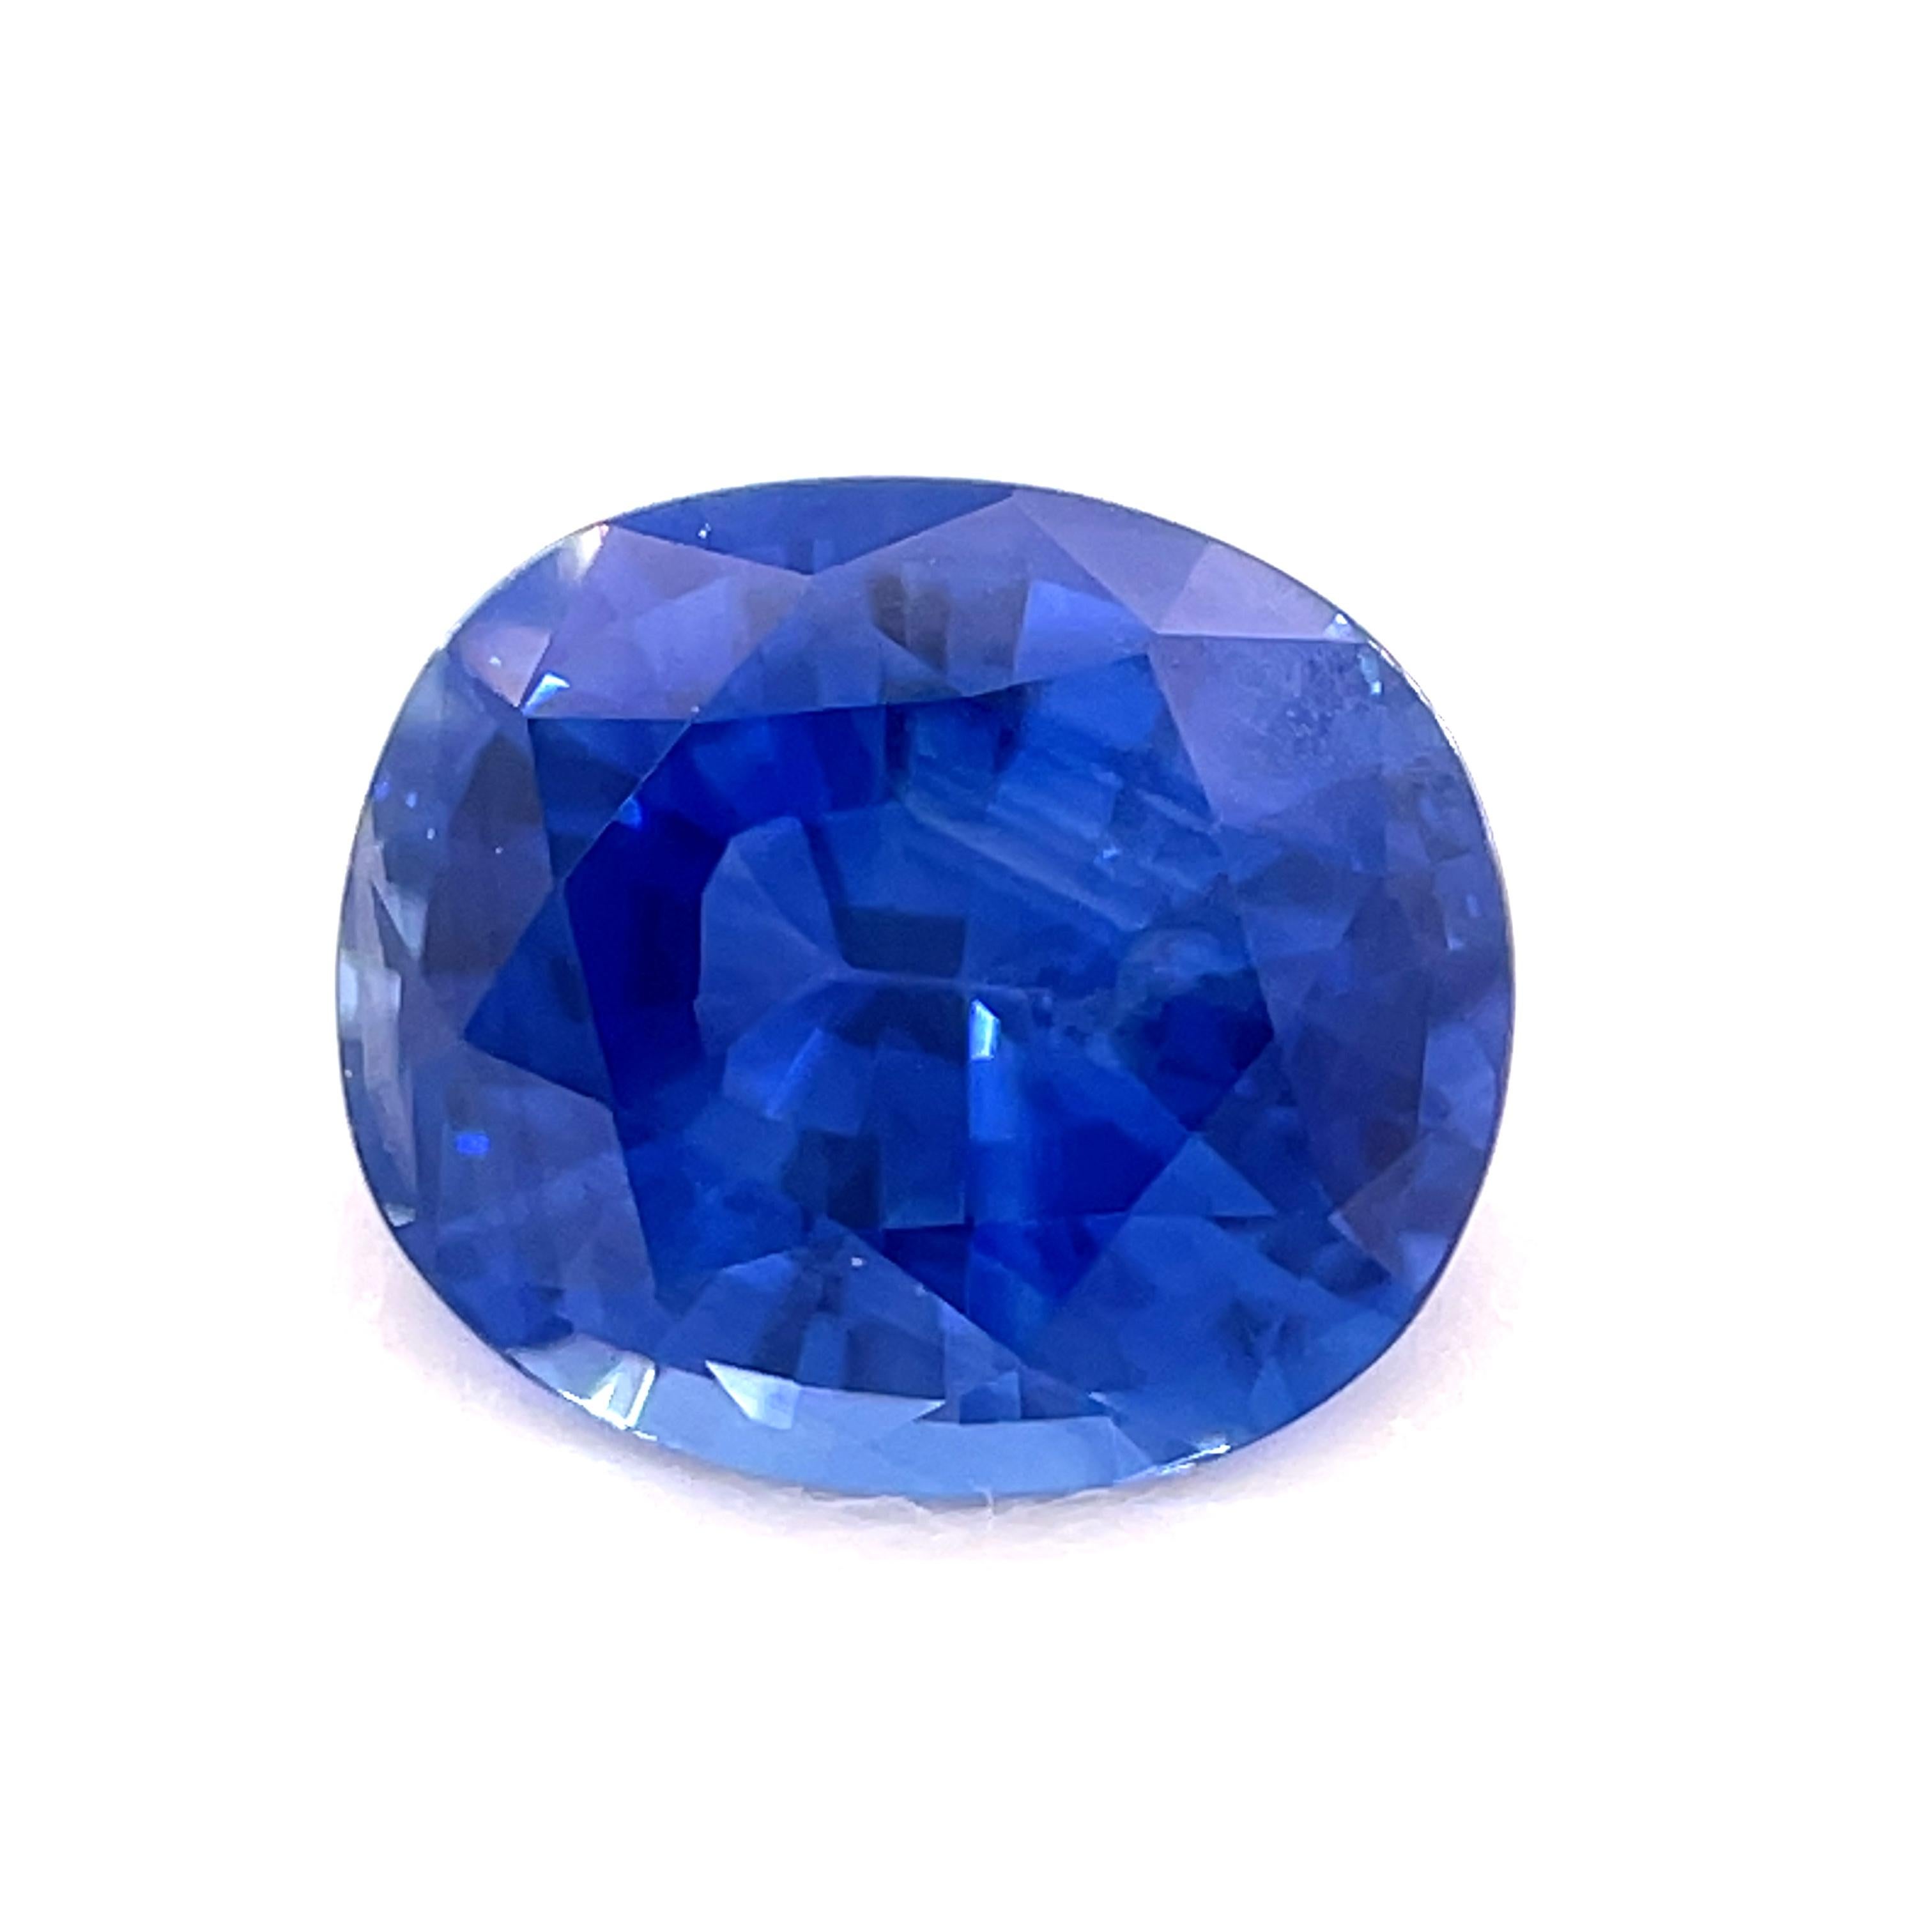 Women's or Men's 1.17 Carat Oval Blue Sapphire Loose Unset 3-Stone Engagement Ring Gemstone For Sale